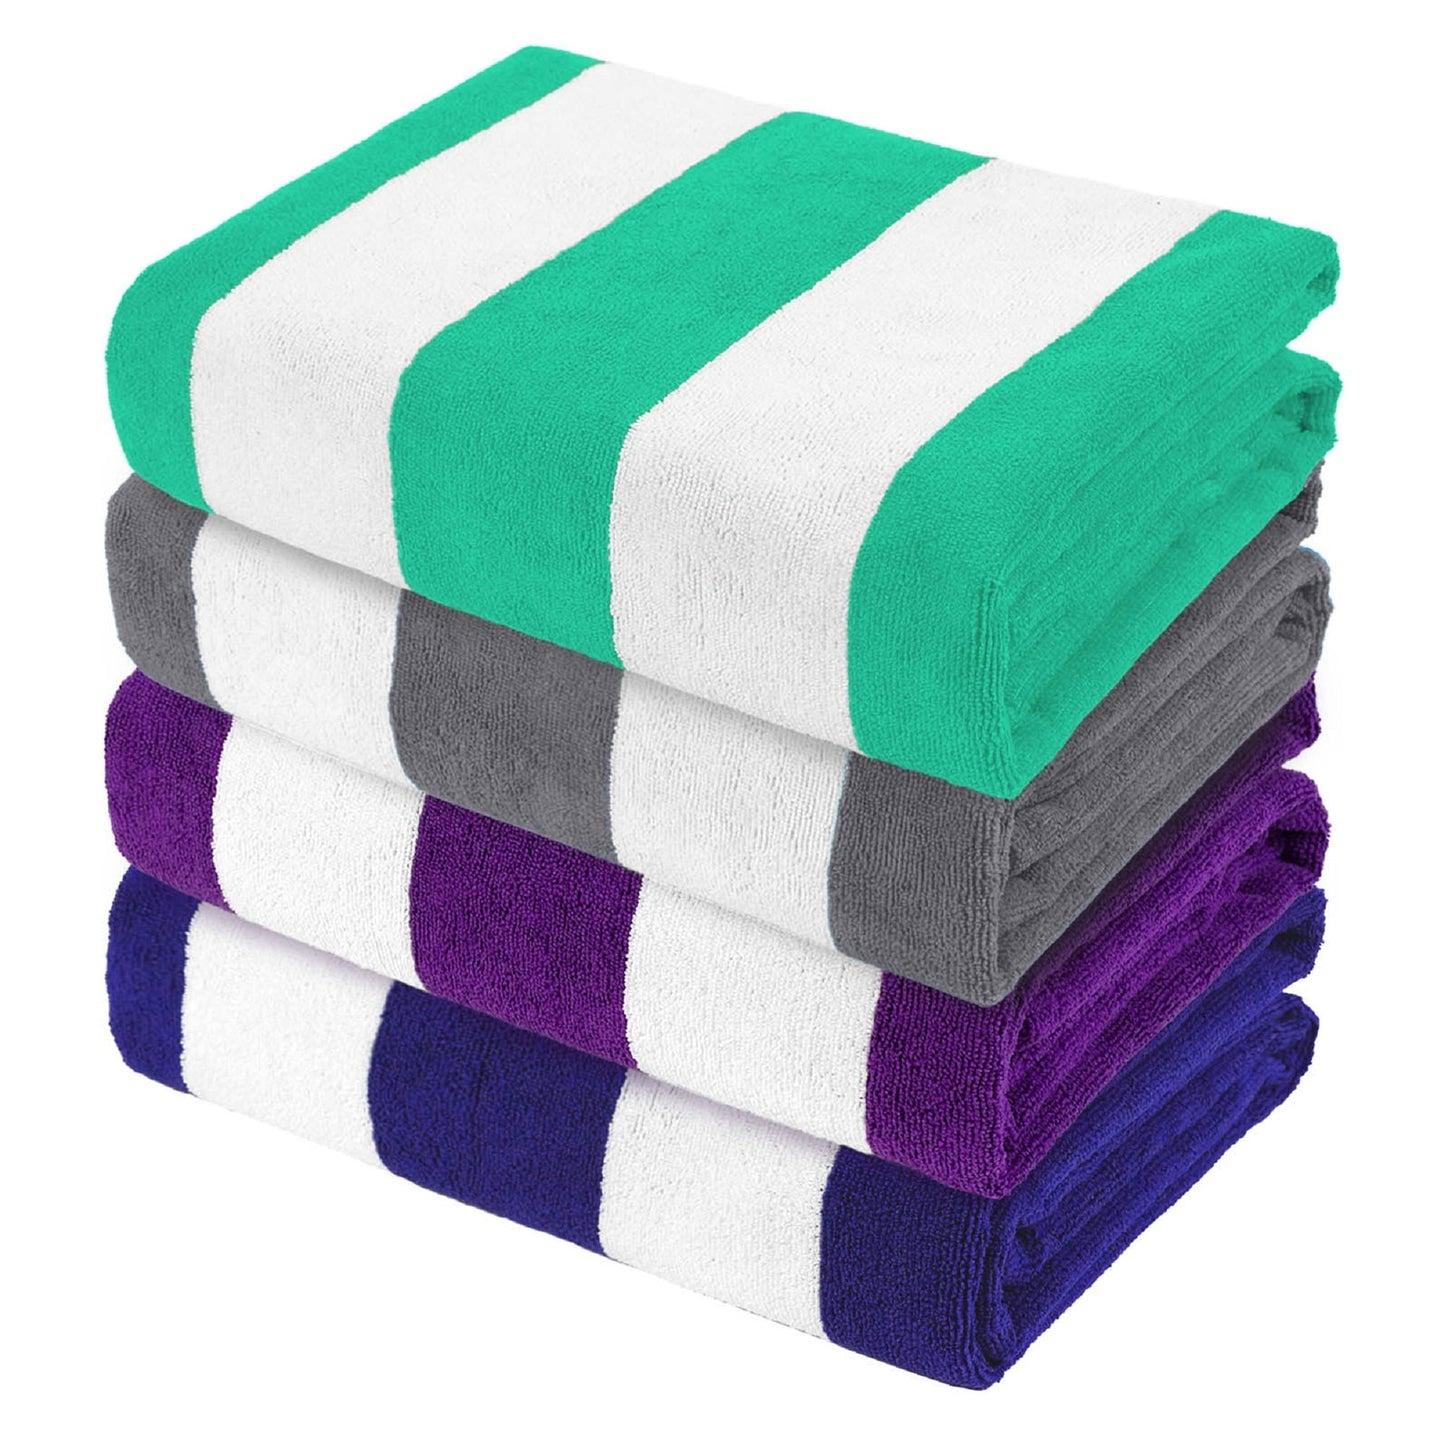 Exclusivo Mezcla 4-Pack Large Beach Towel for Kids and Adults, Microfiber Cabana Striped Pool Beach Towels Set (Purple/Navy/Gray/Caribbean Green, 30" x 60"), Lightweight and Highly Absorbent